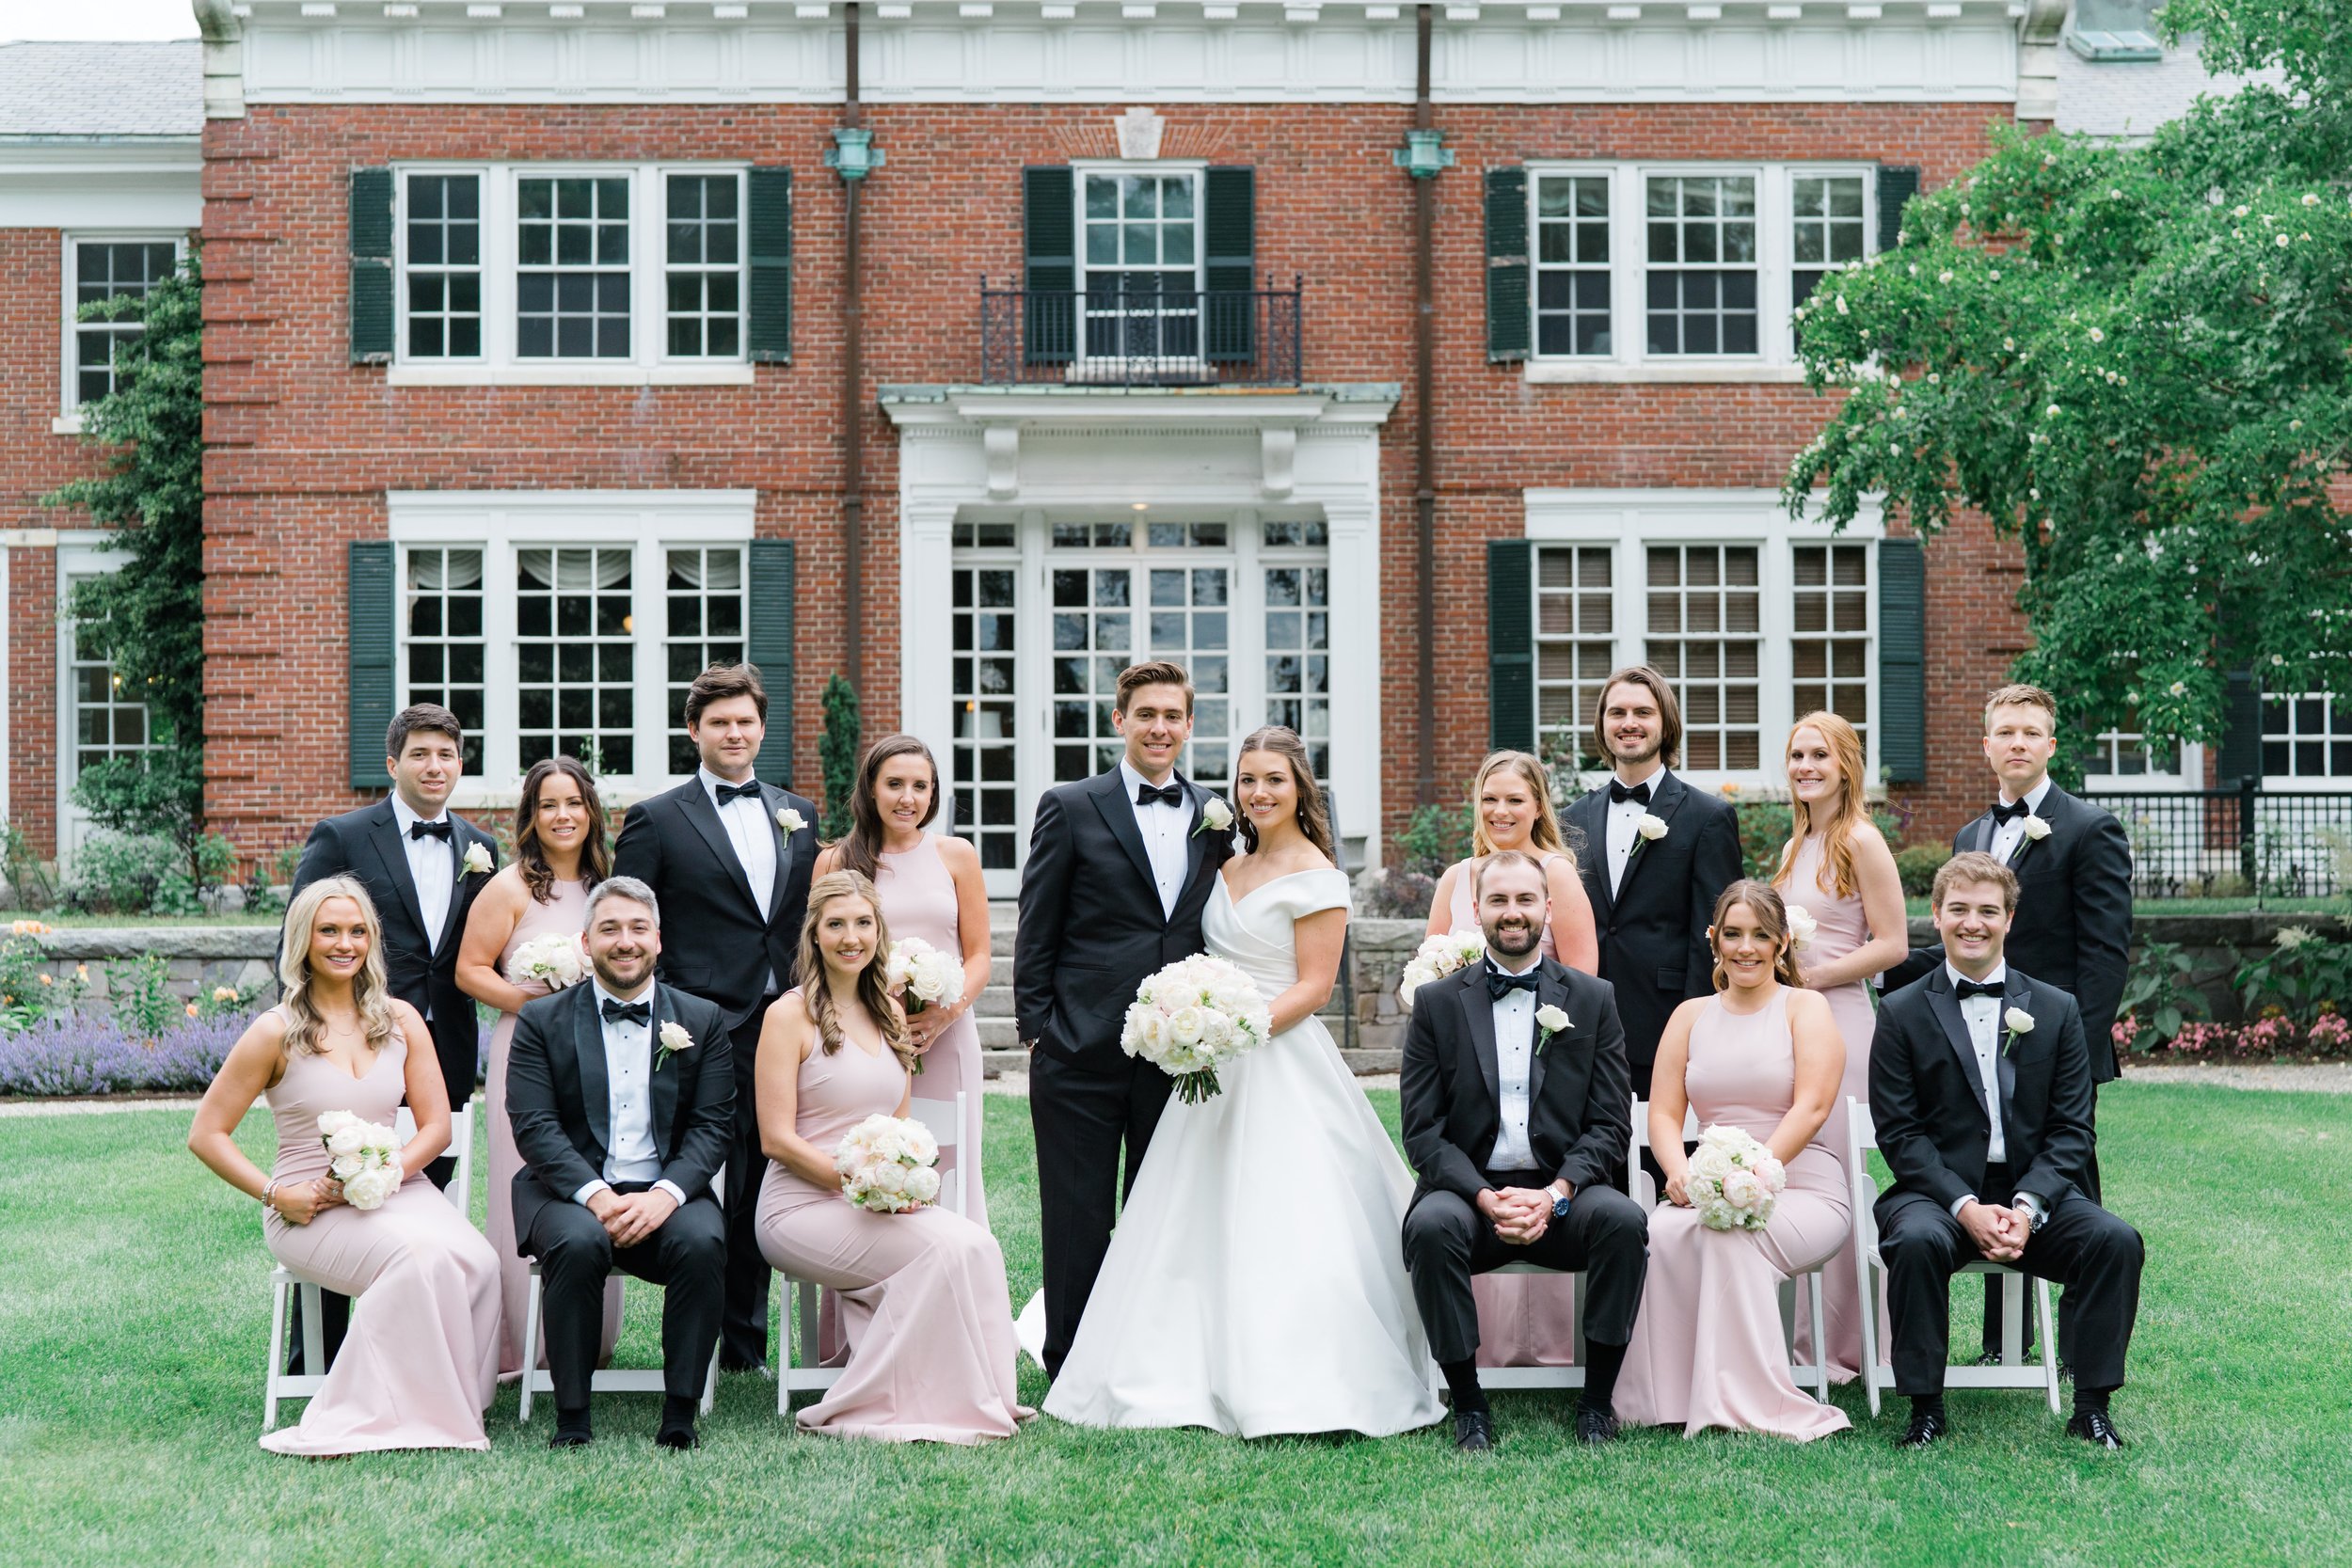 Full bridal party group picture on the lawn at the Bradley Estate. Black tie groomsmen and bridesmaids in dusty pink maxi dresses. Boston Wedding Photographer